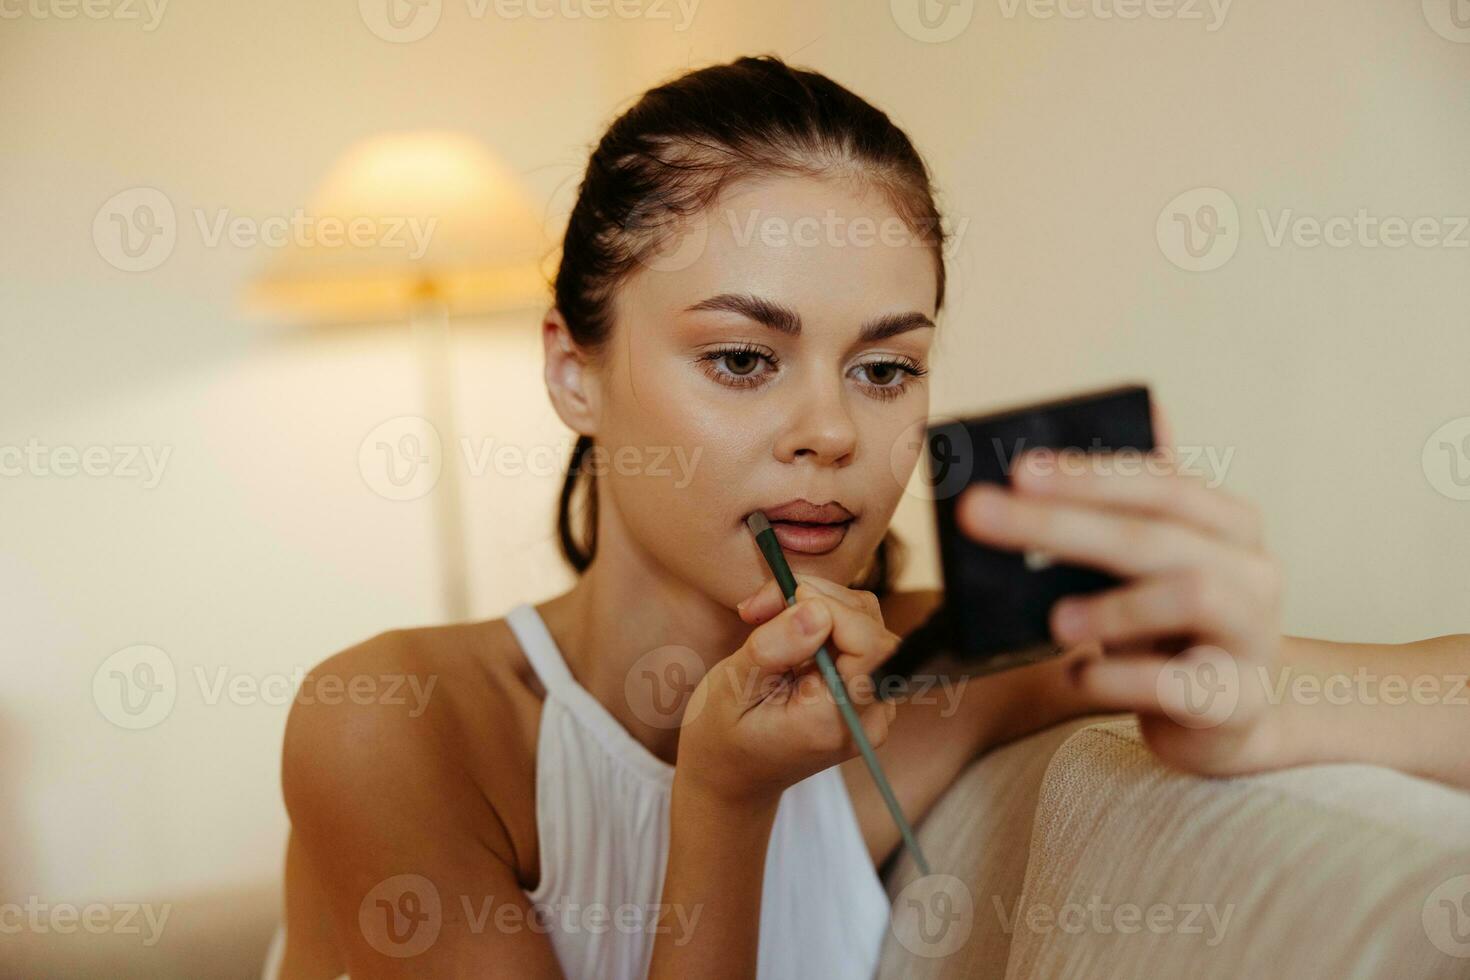 A woman at home looks in the mirror and applies makeup lipstick, beauty concept, problem skin care with acne, home makeup. photo